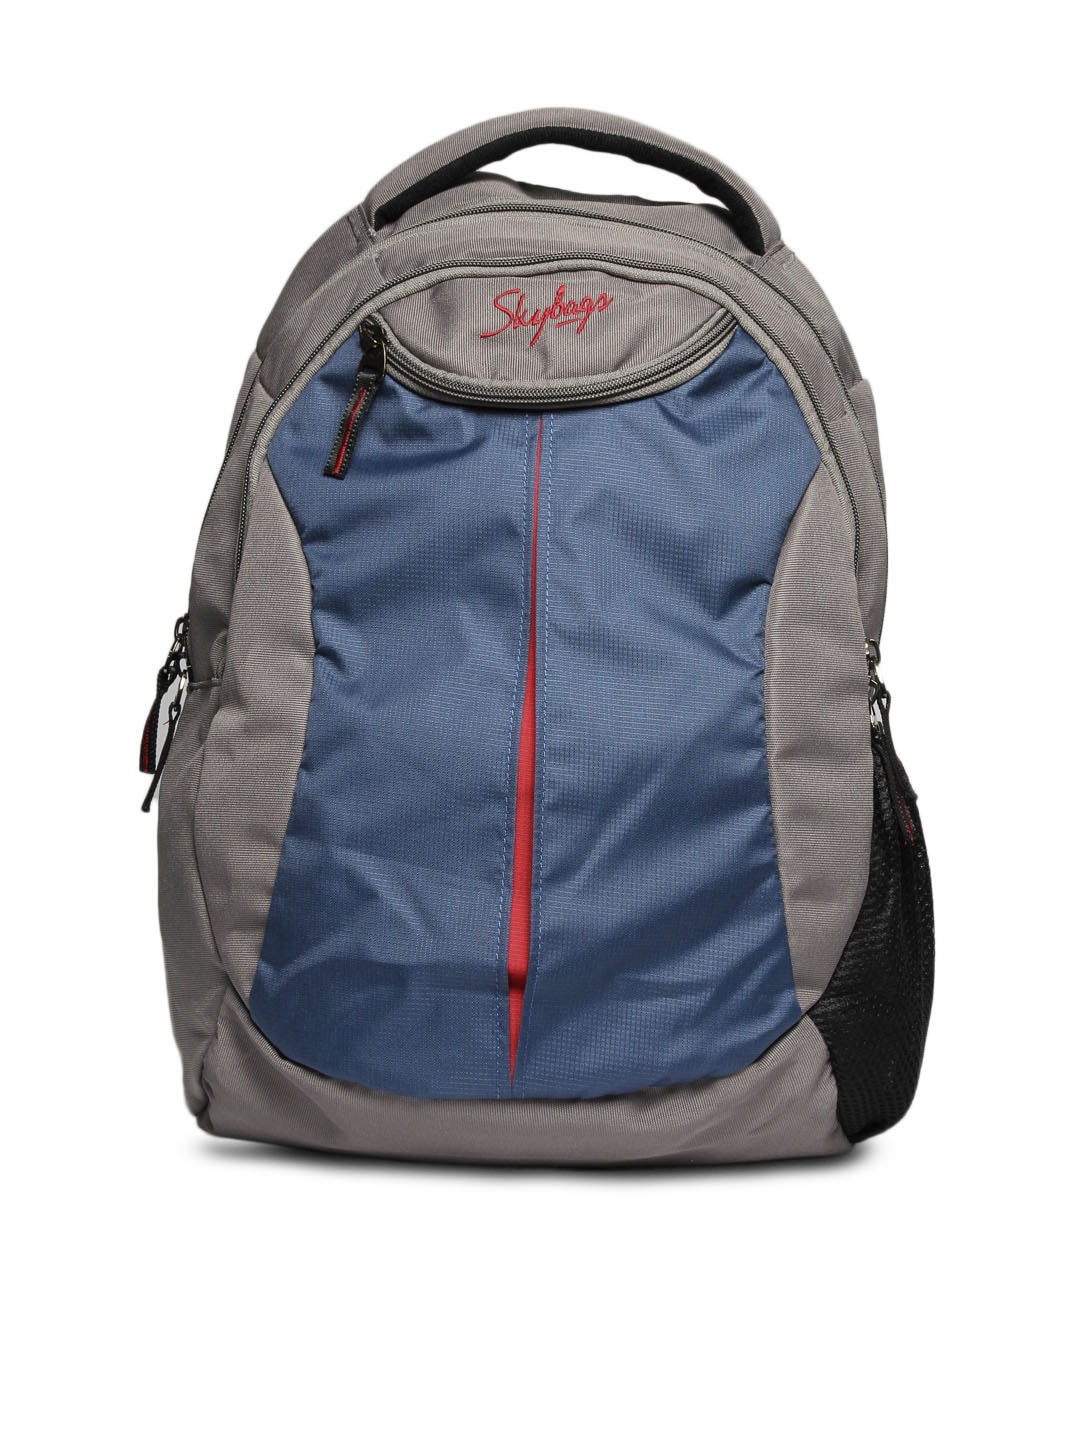 Skybags Unisex Grey Backpack